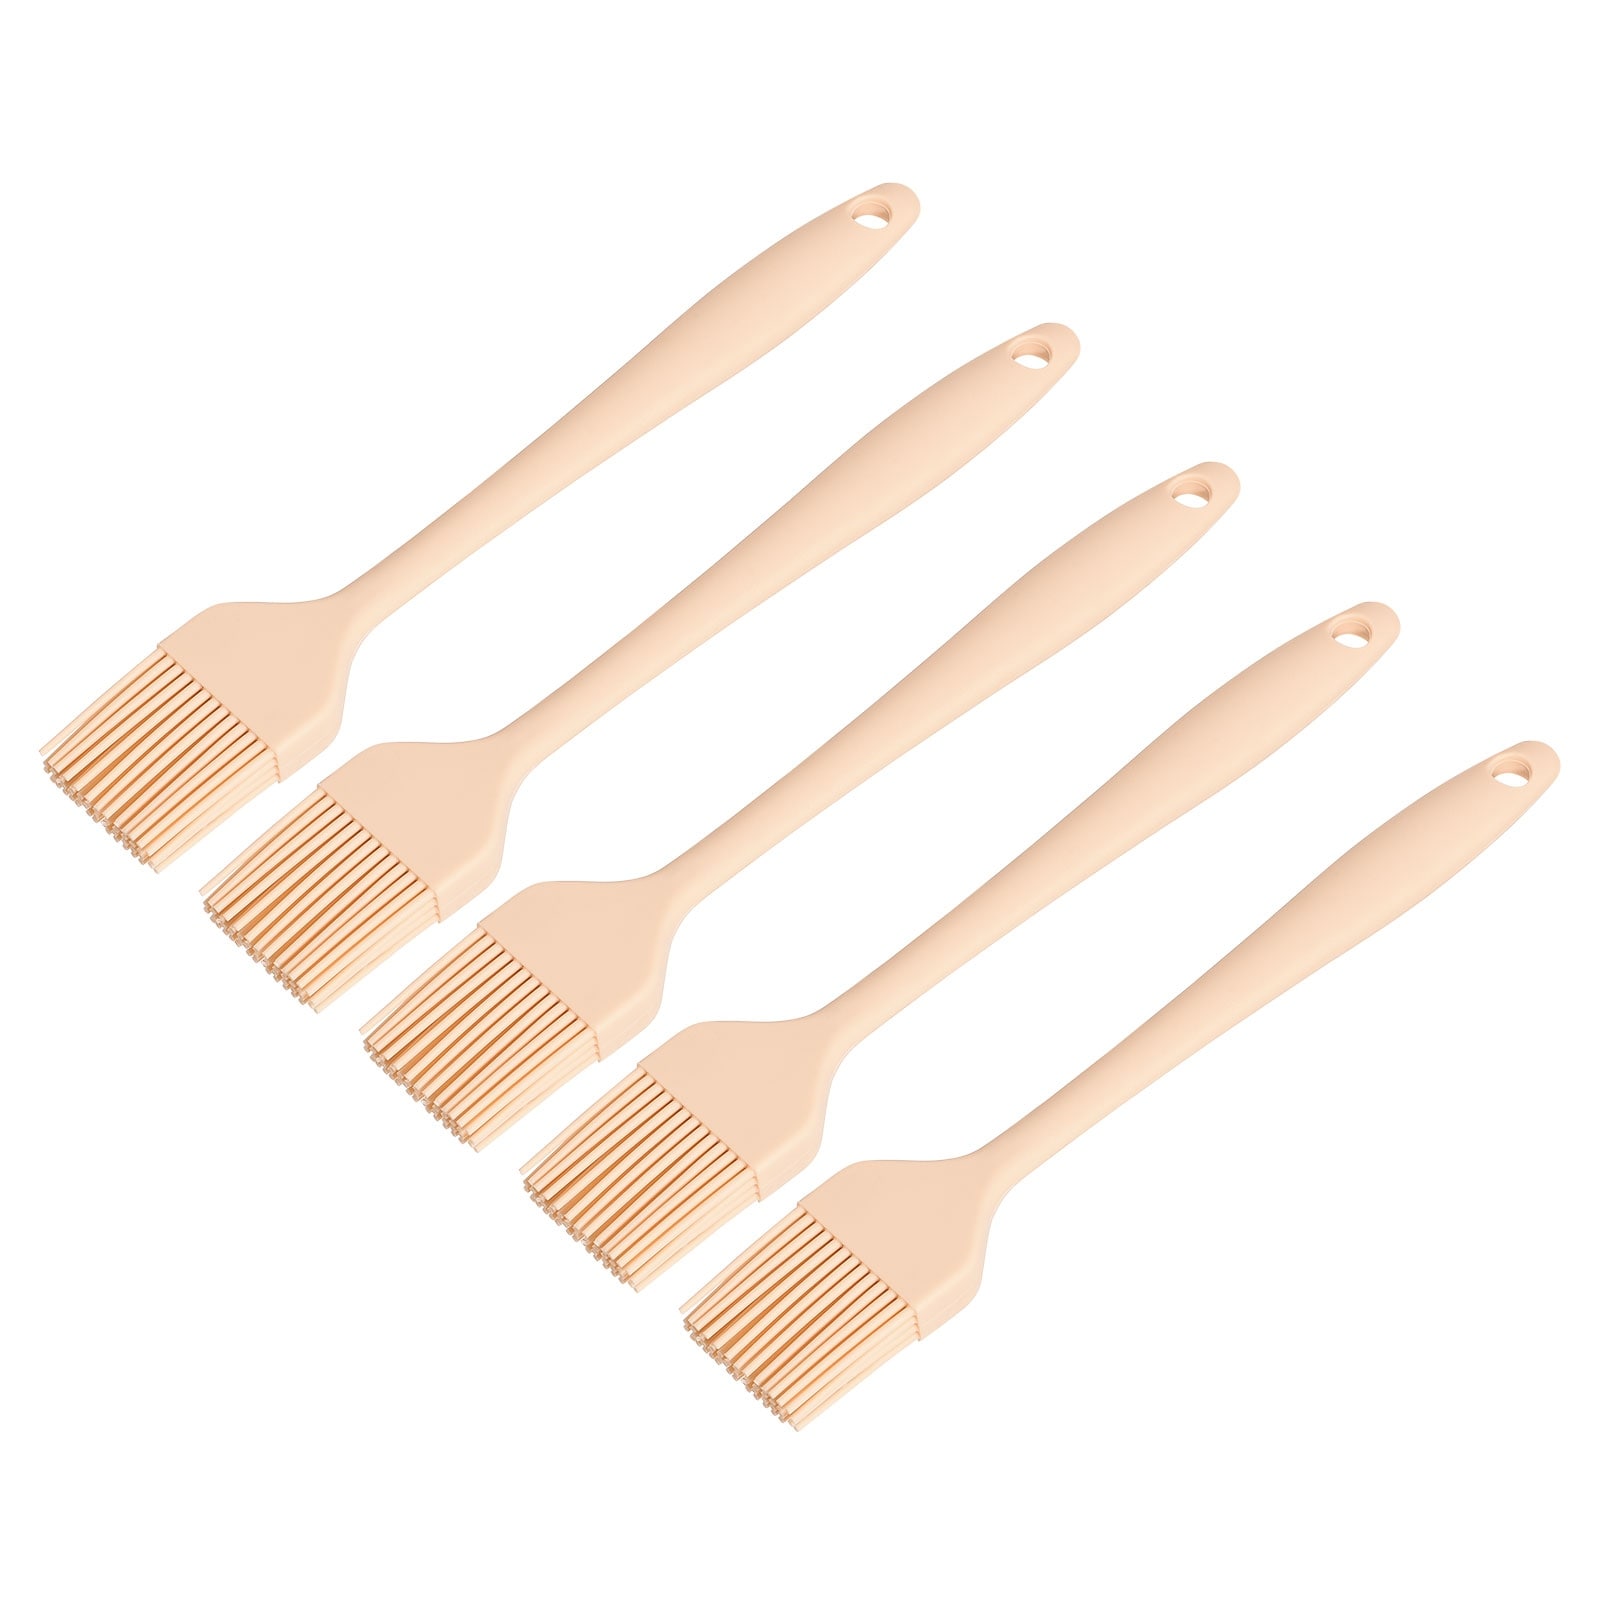 https://ak1.ostkcdn.com/images/products/is/images/direct/744494fe2b88c9c9705d6bb30e816ae301ca8234/Basting-Pastry-Brush%2C-8%E2%80%9D-Silicone-Flexible-Brushes-for-Baking.jpg